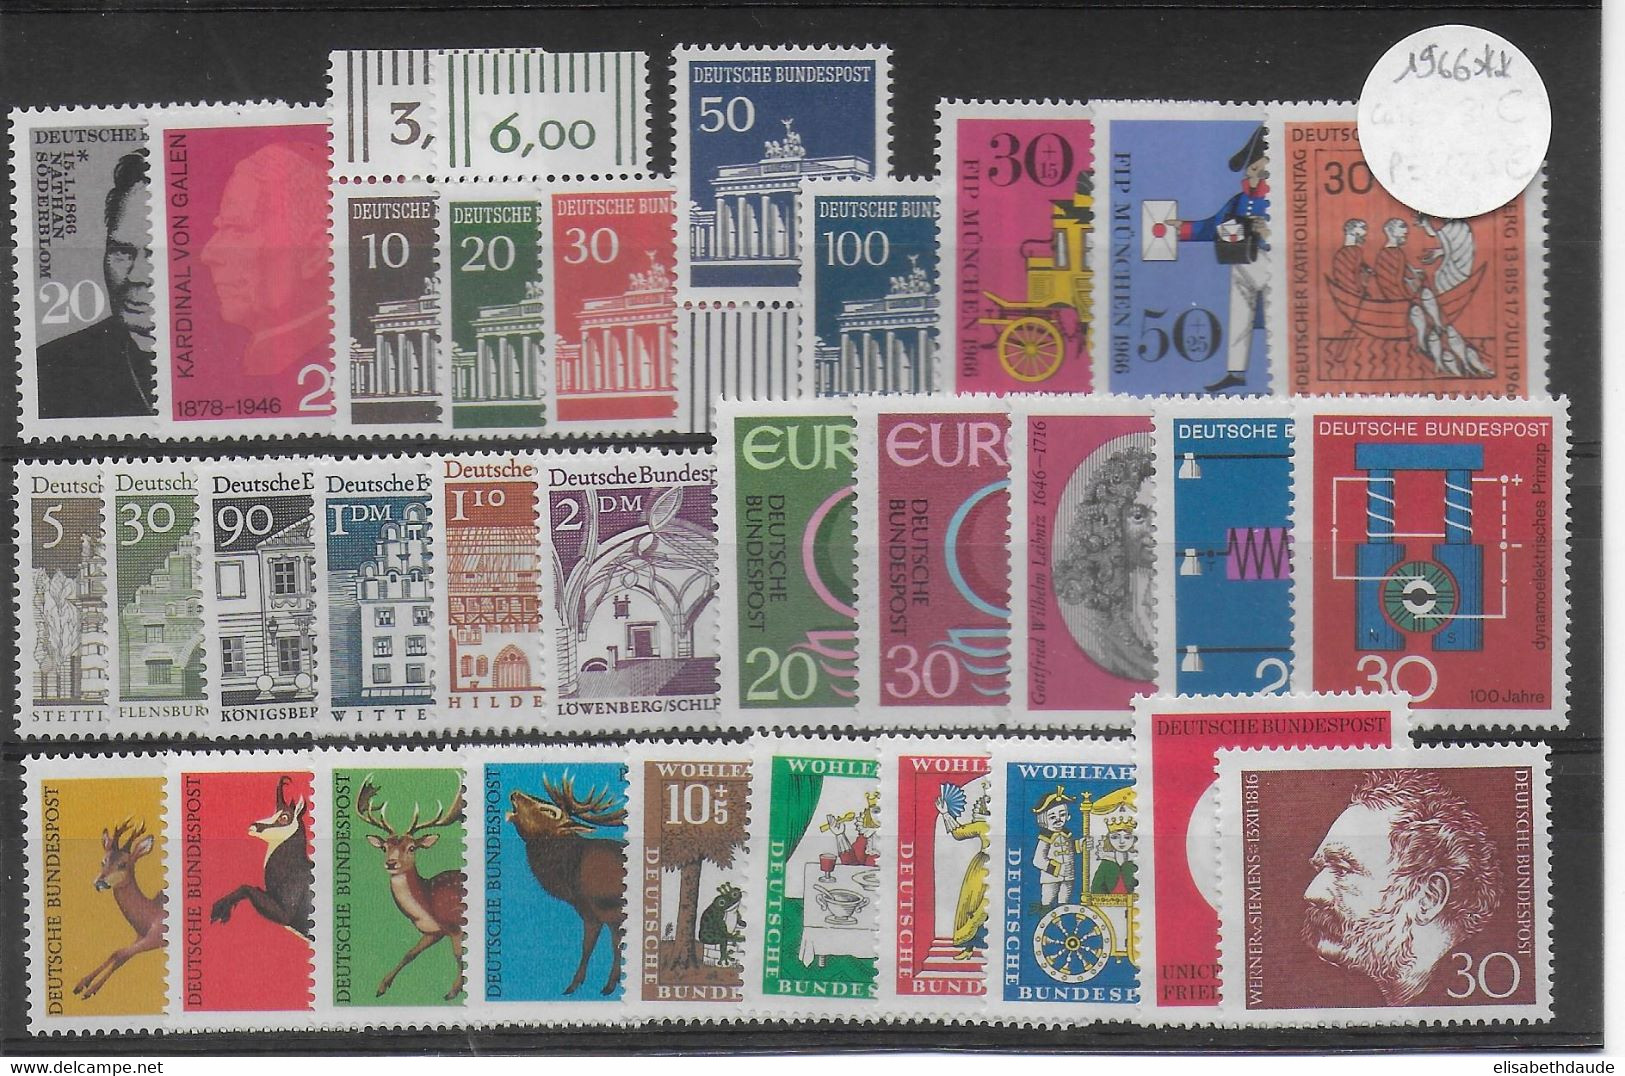 BRD - ANNEE COMPLETE 1966 ** MNH  - YVERT N°356/385 - COTE = 32 EUR - Annual Collections